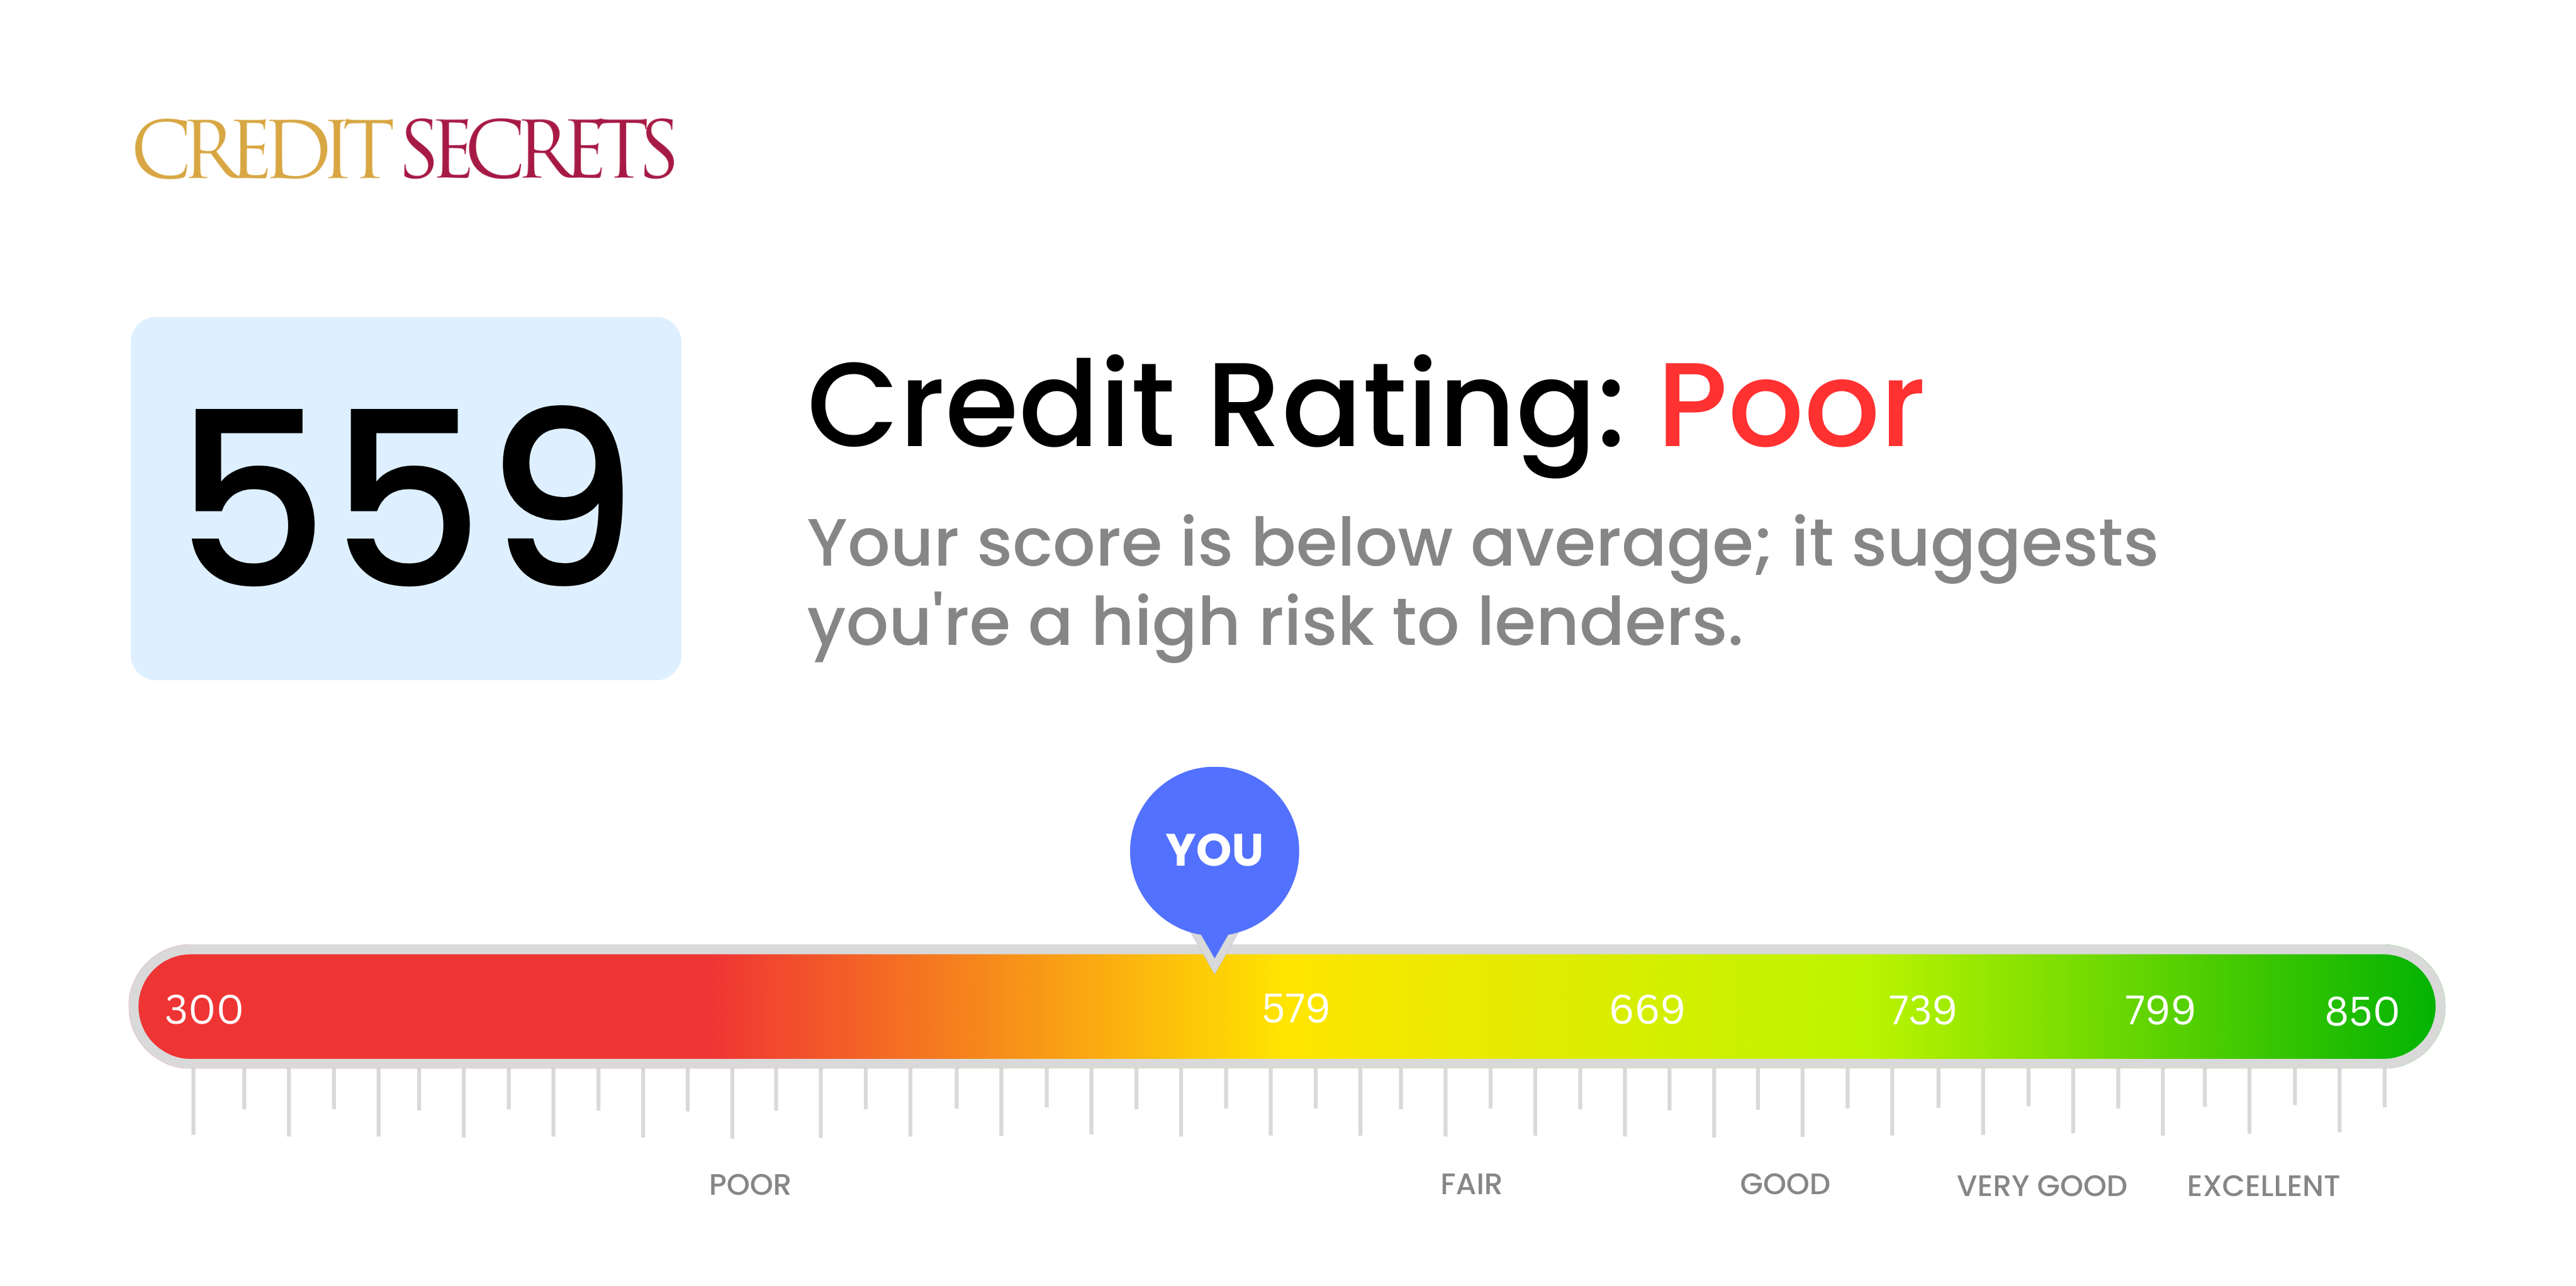 Is 559 a good credit score?